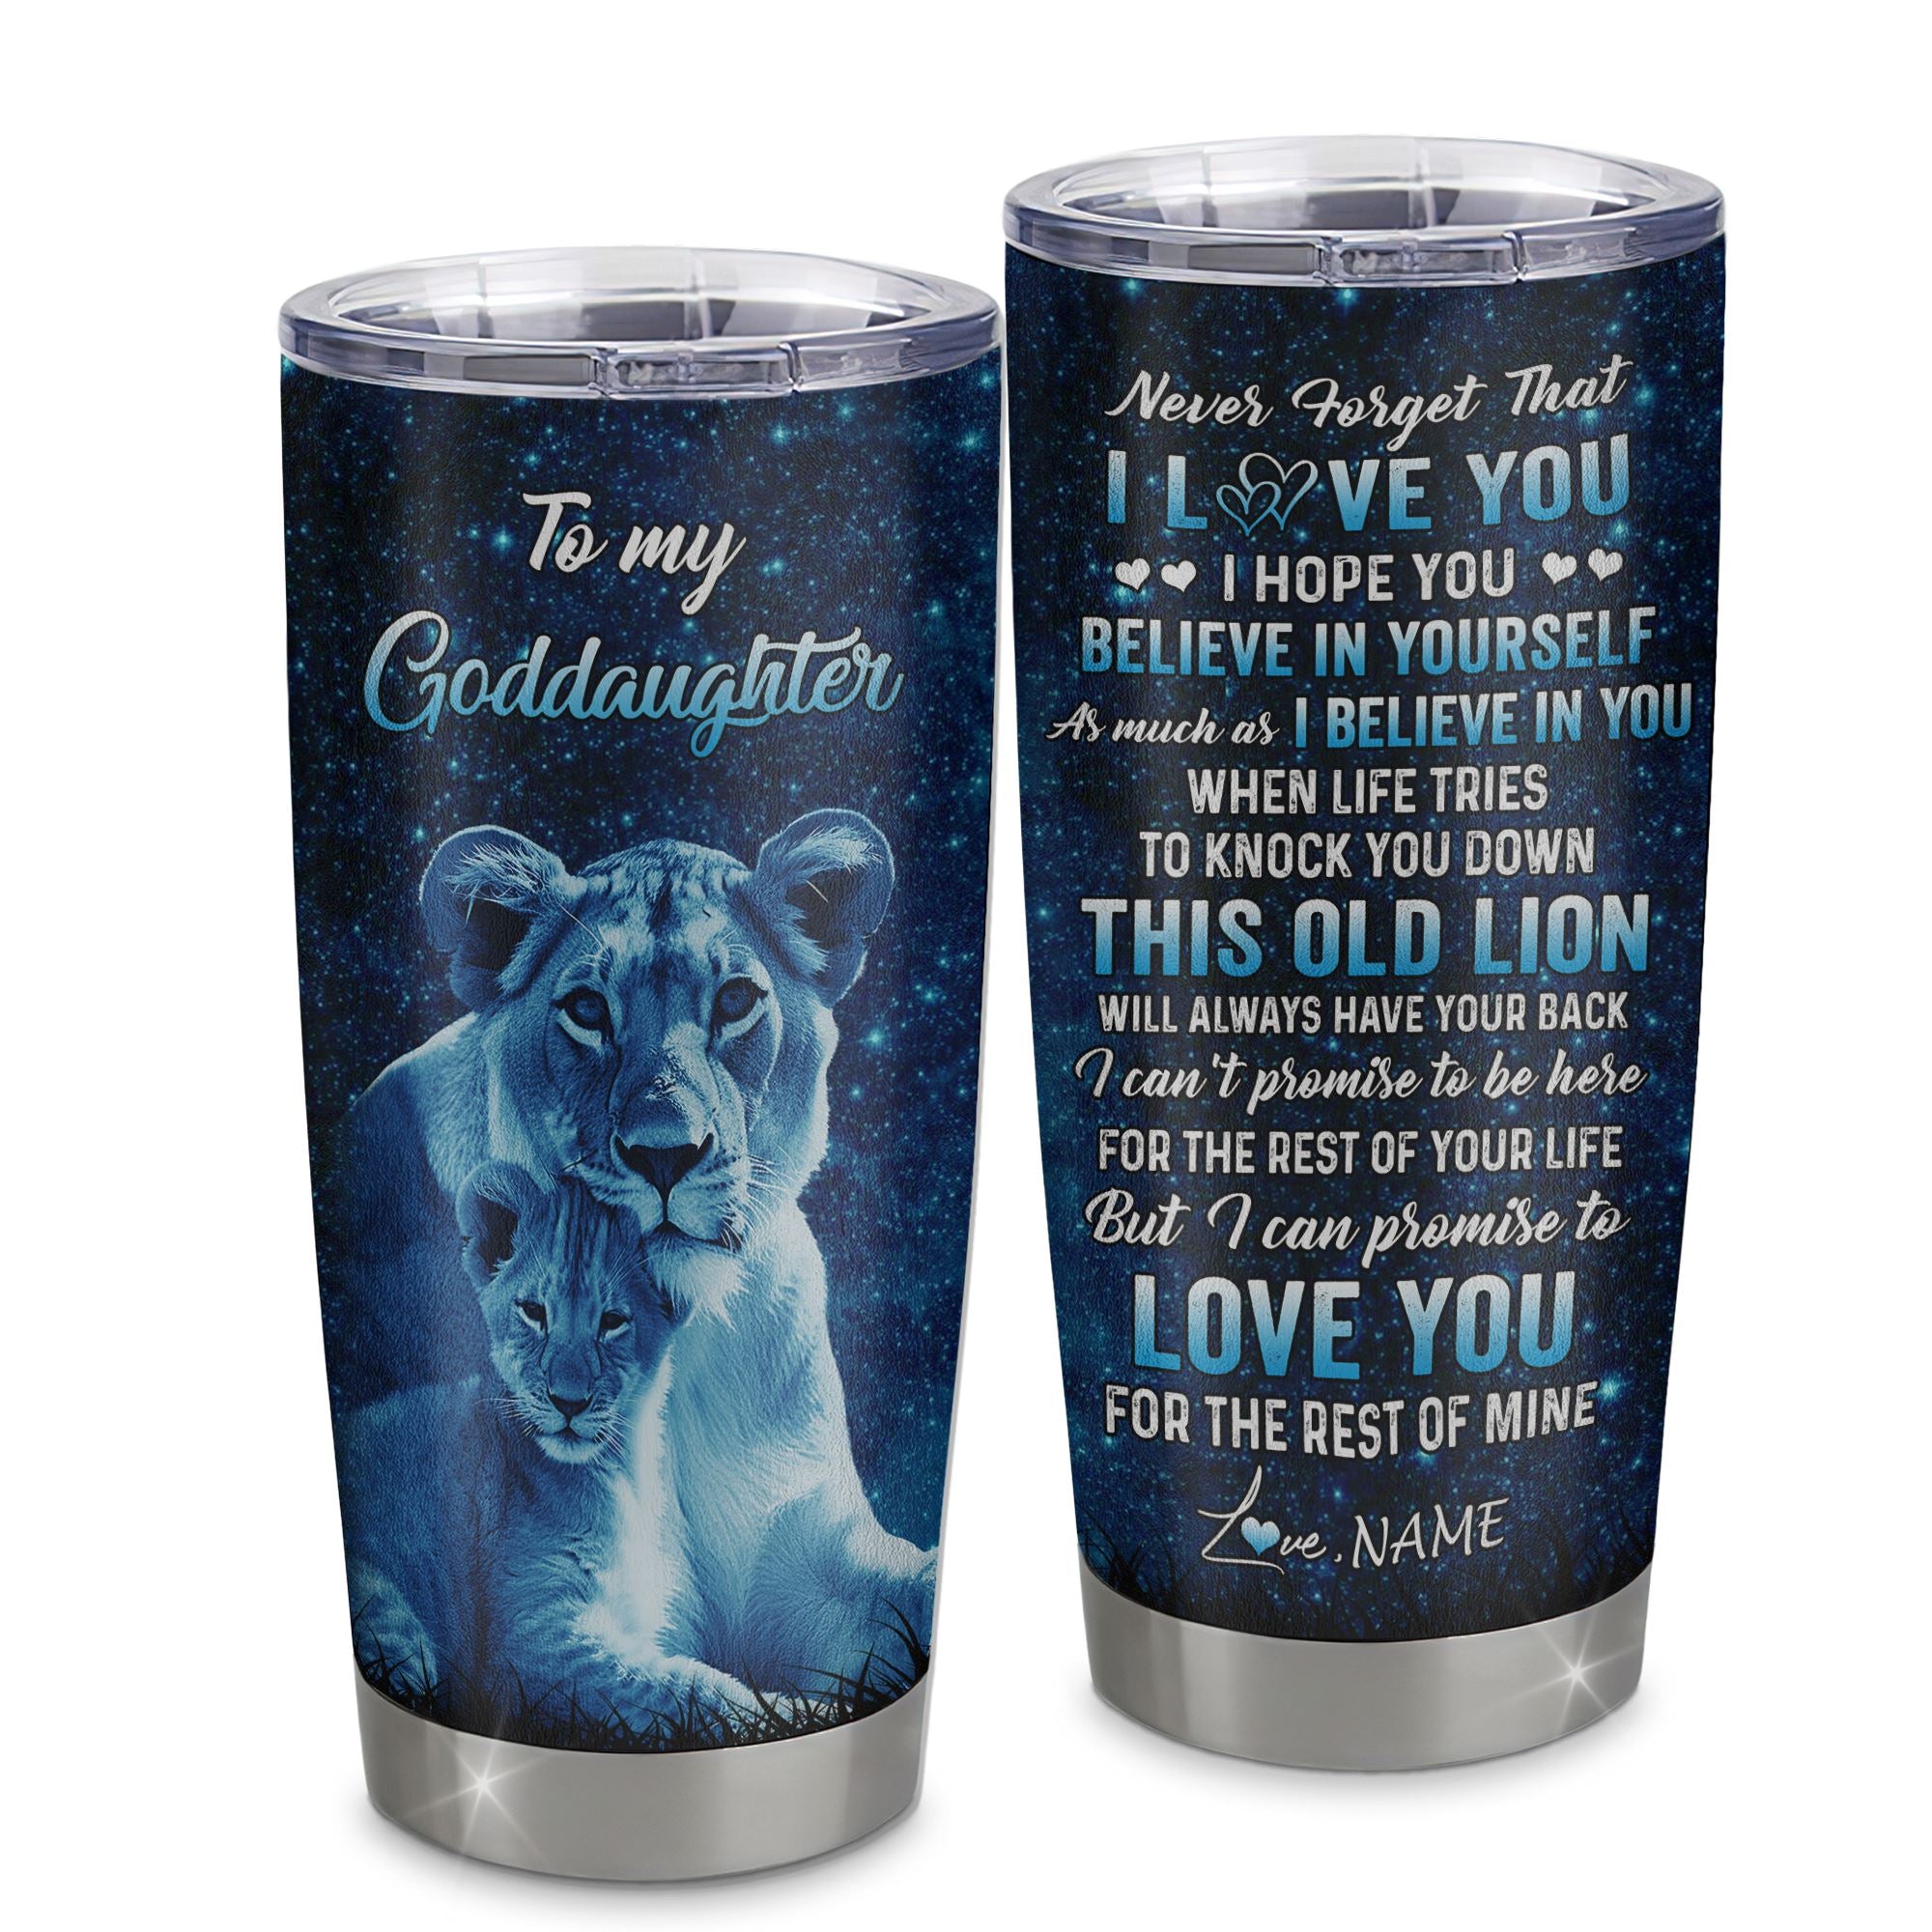 Personalized_To_My_Goddaughter_Tumbler_From_Godmother_Stainless_Steel_Cup_This_Old_Lion_Love_You_Goddaughter_Birthday_Graduation_Christmas_Custom_Travel_Mug_Tumbler_mockup_1.jpg